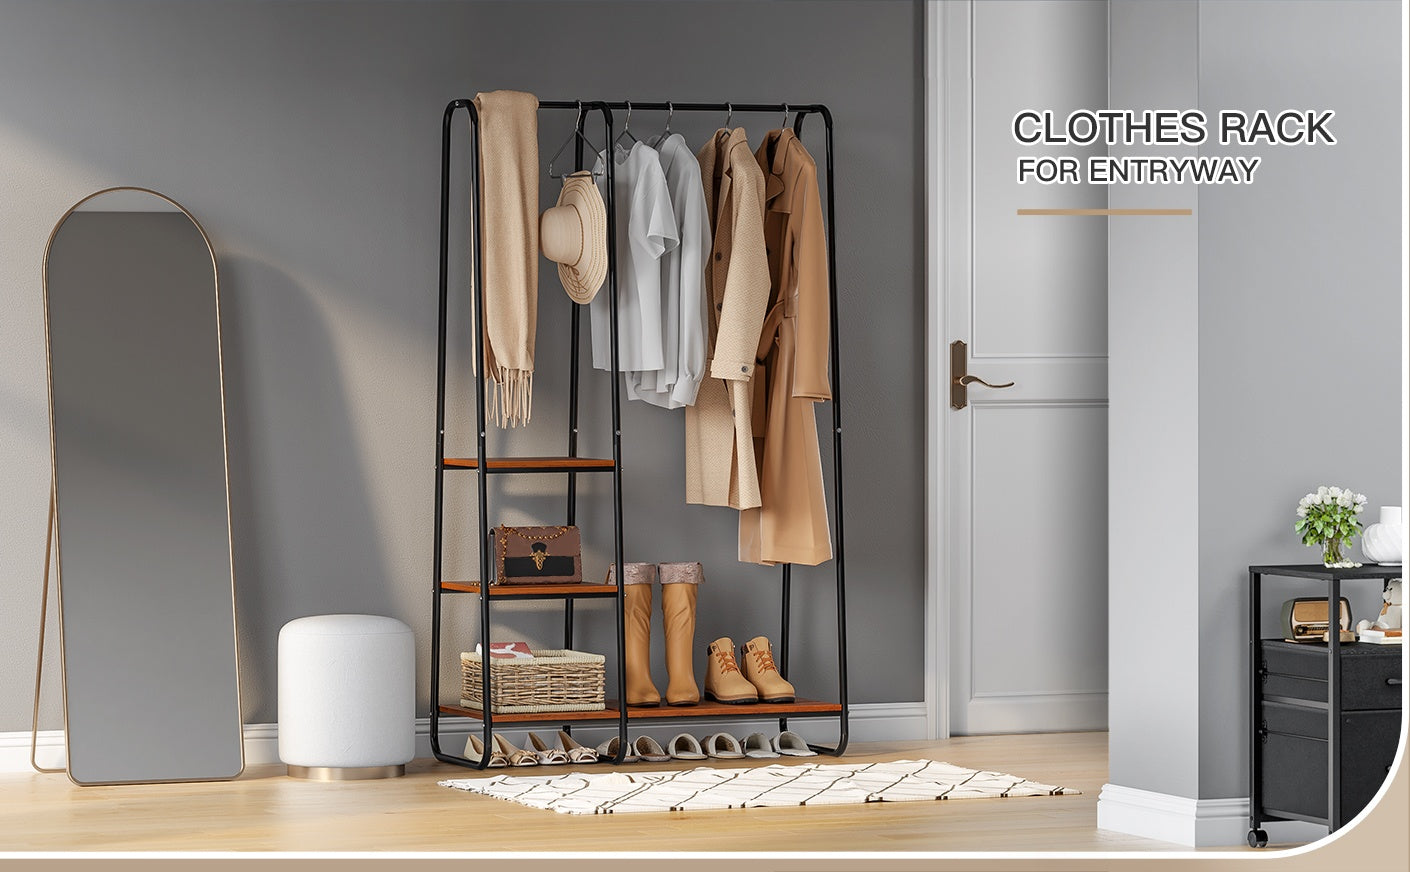 This black hanging garment rack is perfect for entryway